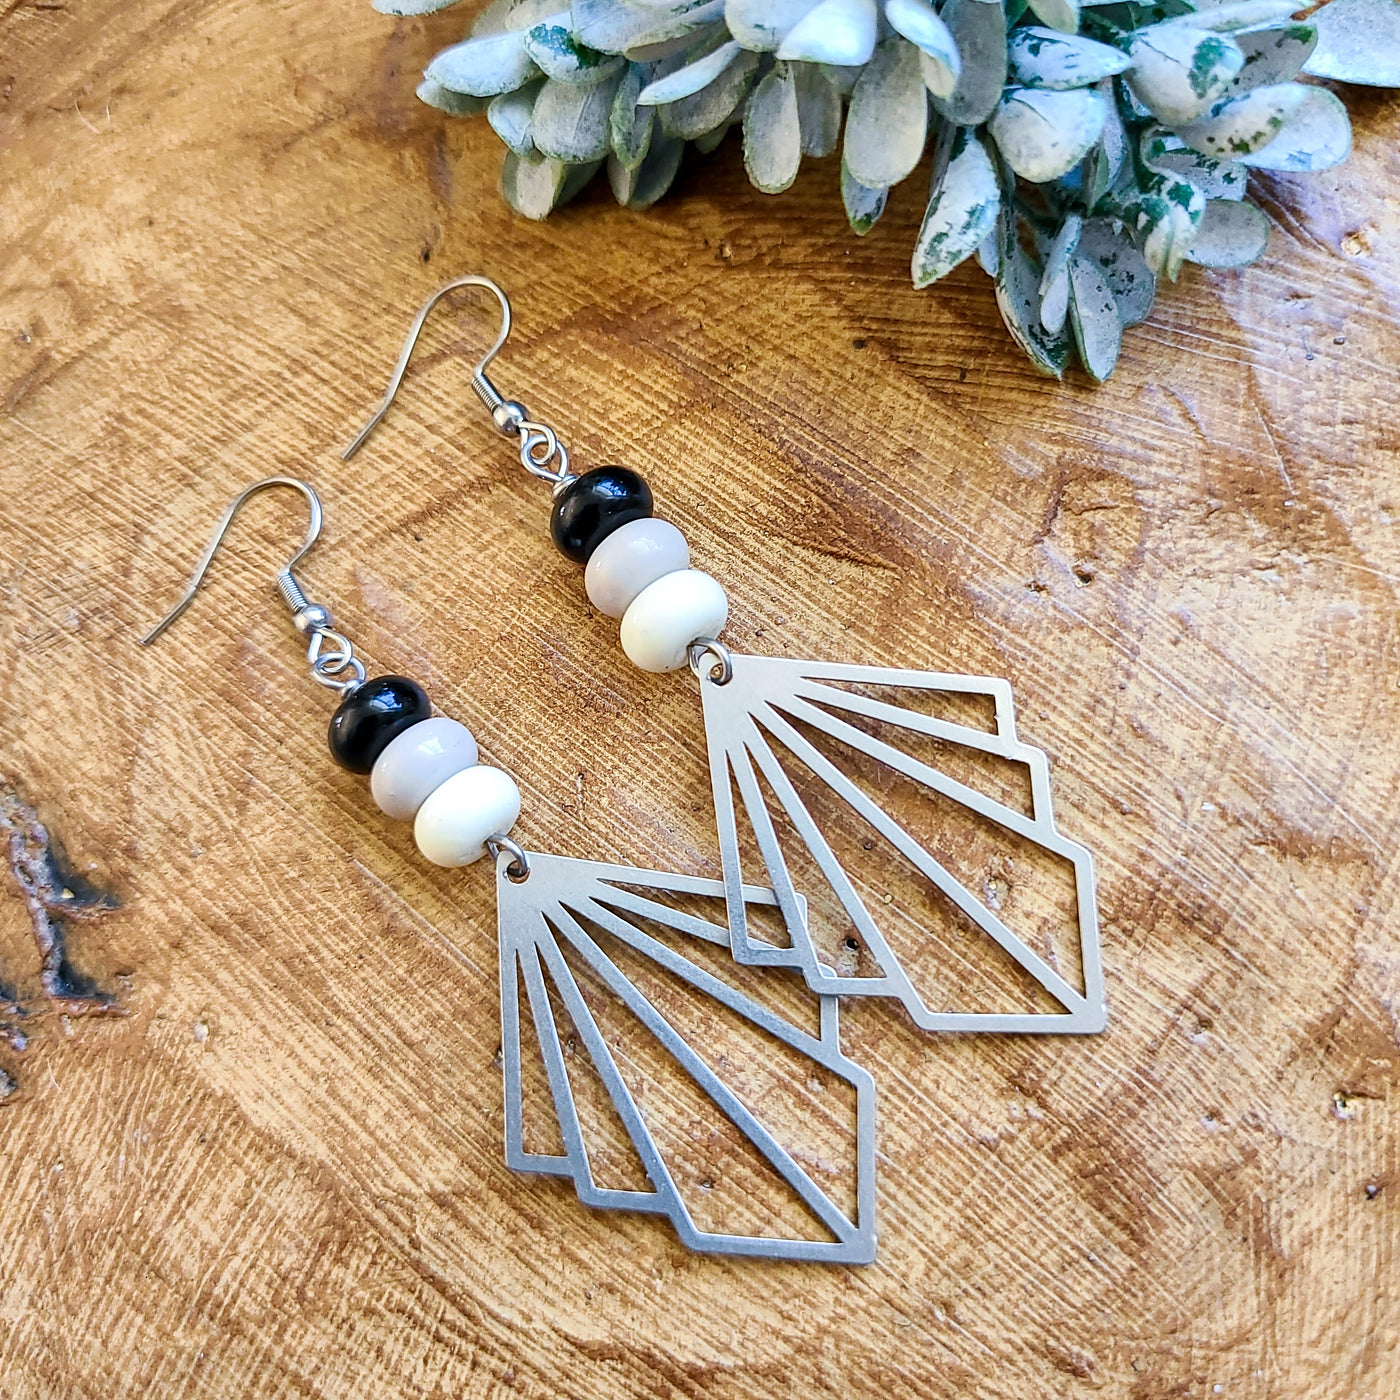 Ombre Beads and Steel Geometric Drops | Earrings